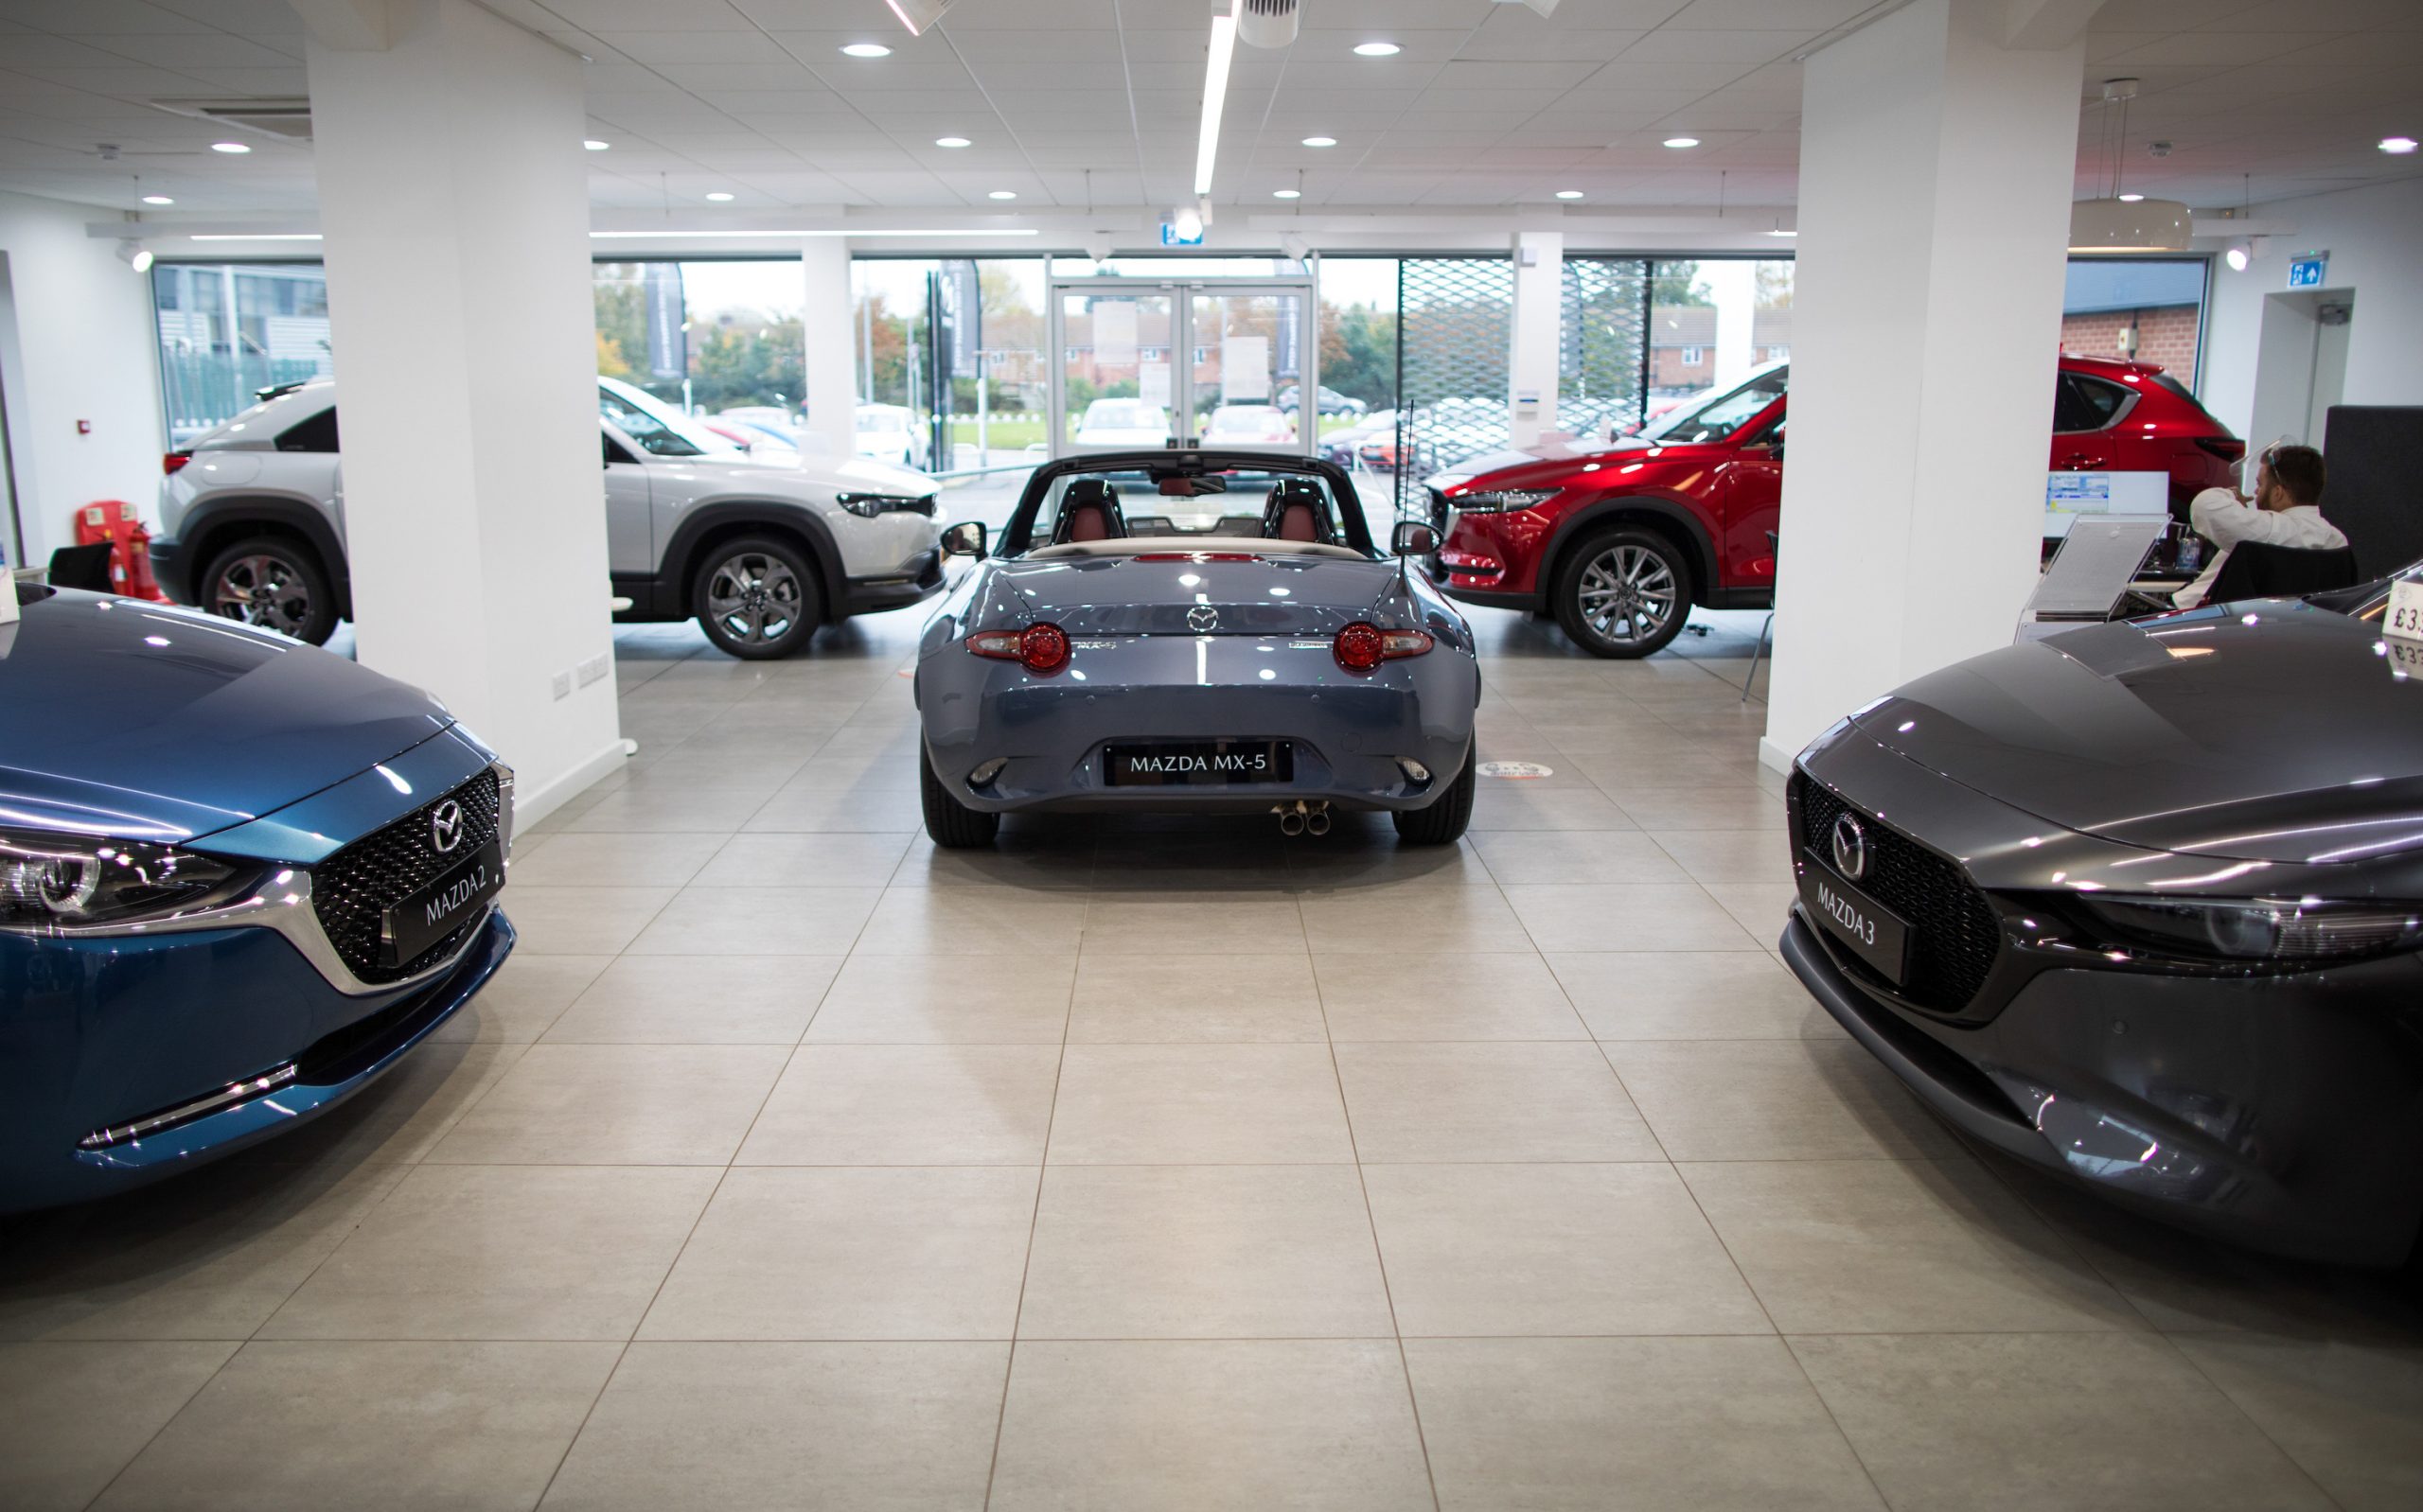 Automobiles manufactured by Mazda Motor Corp., including a MX-5, centre, in the showroom of a dealership